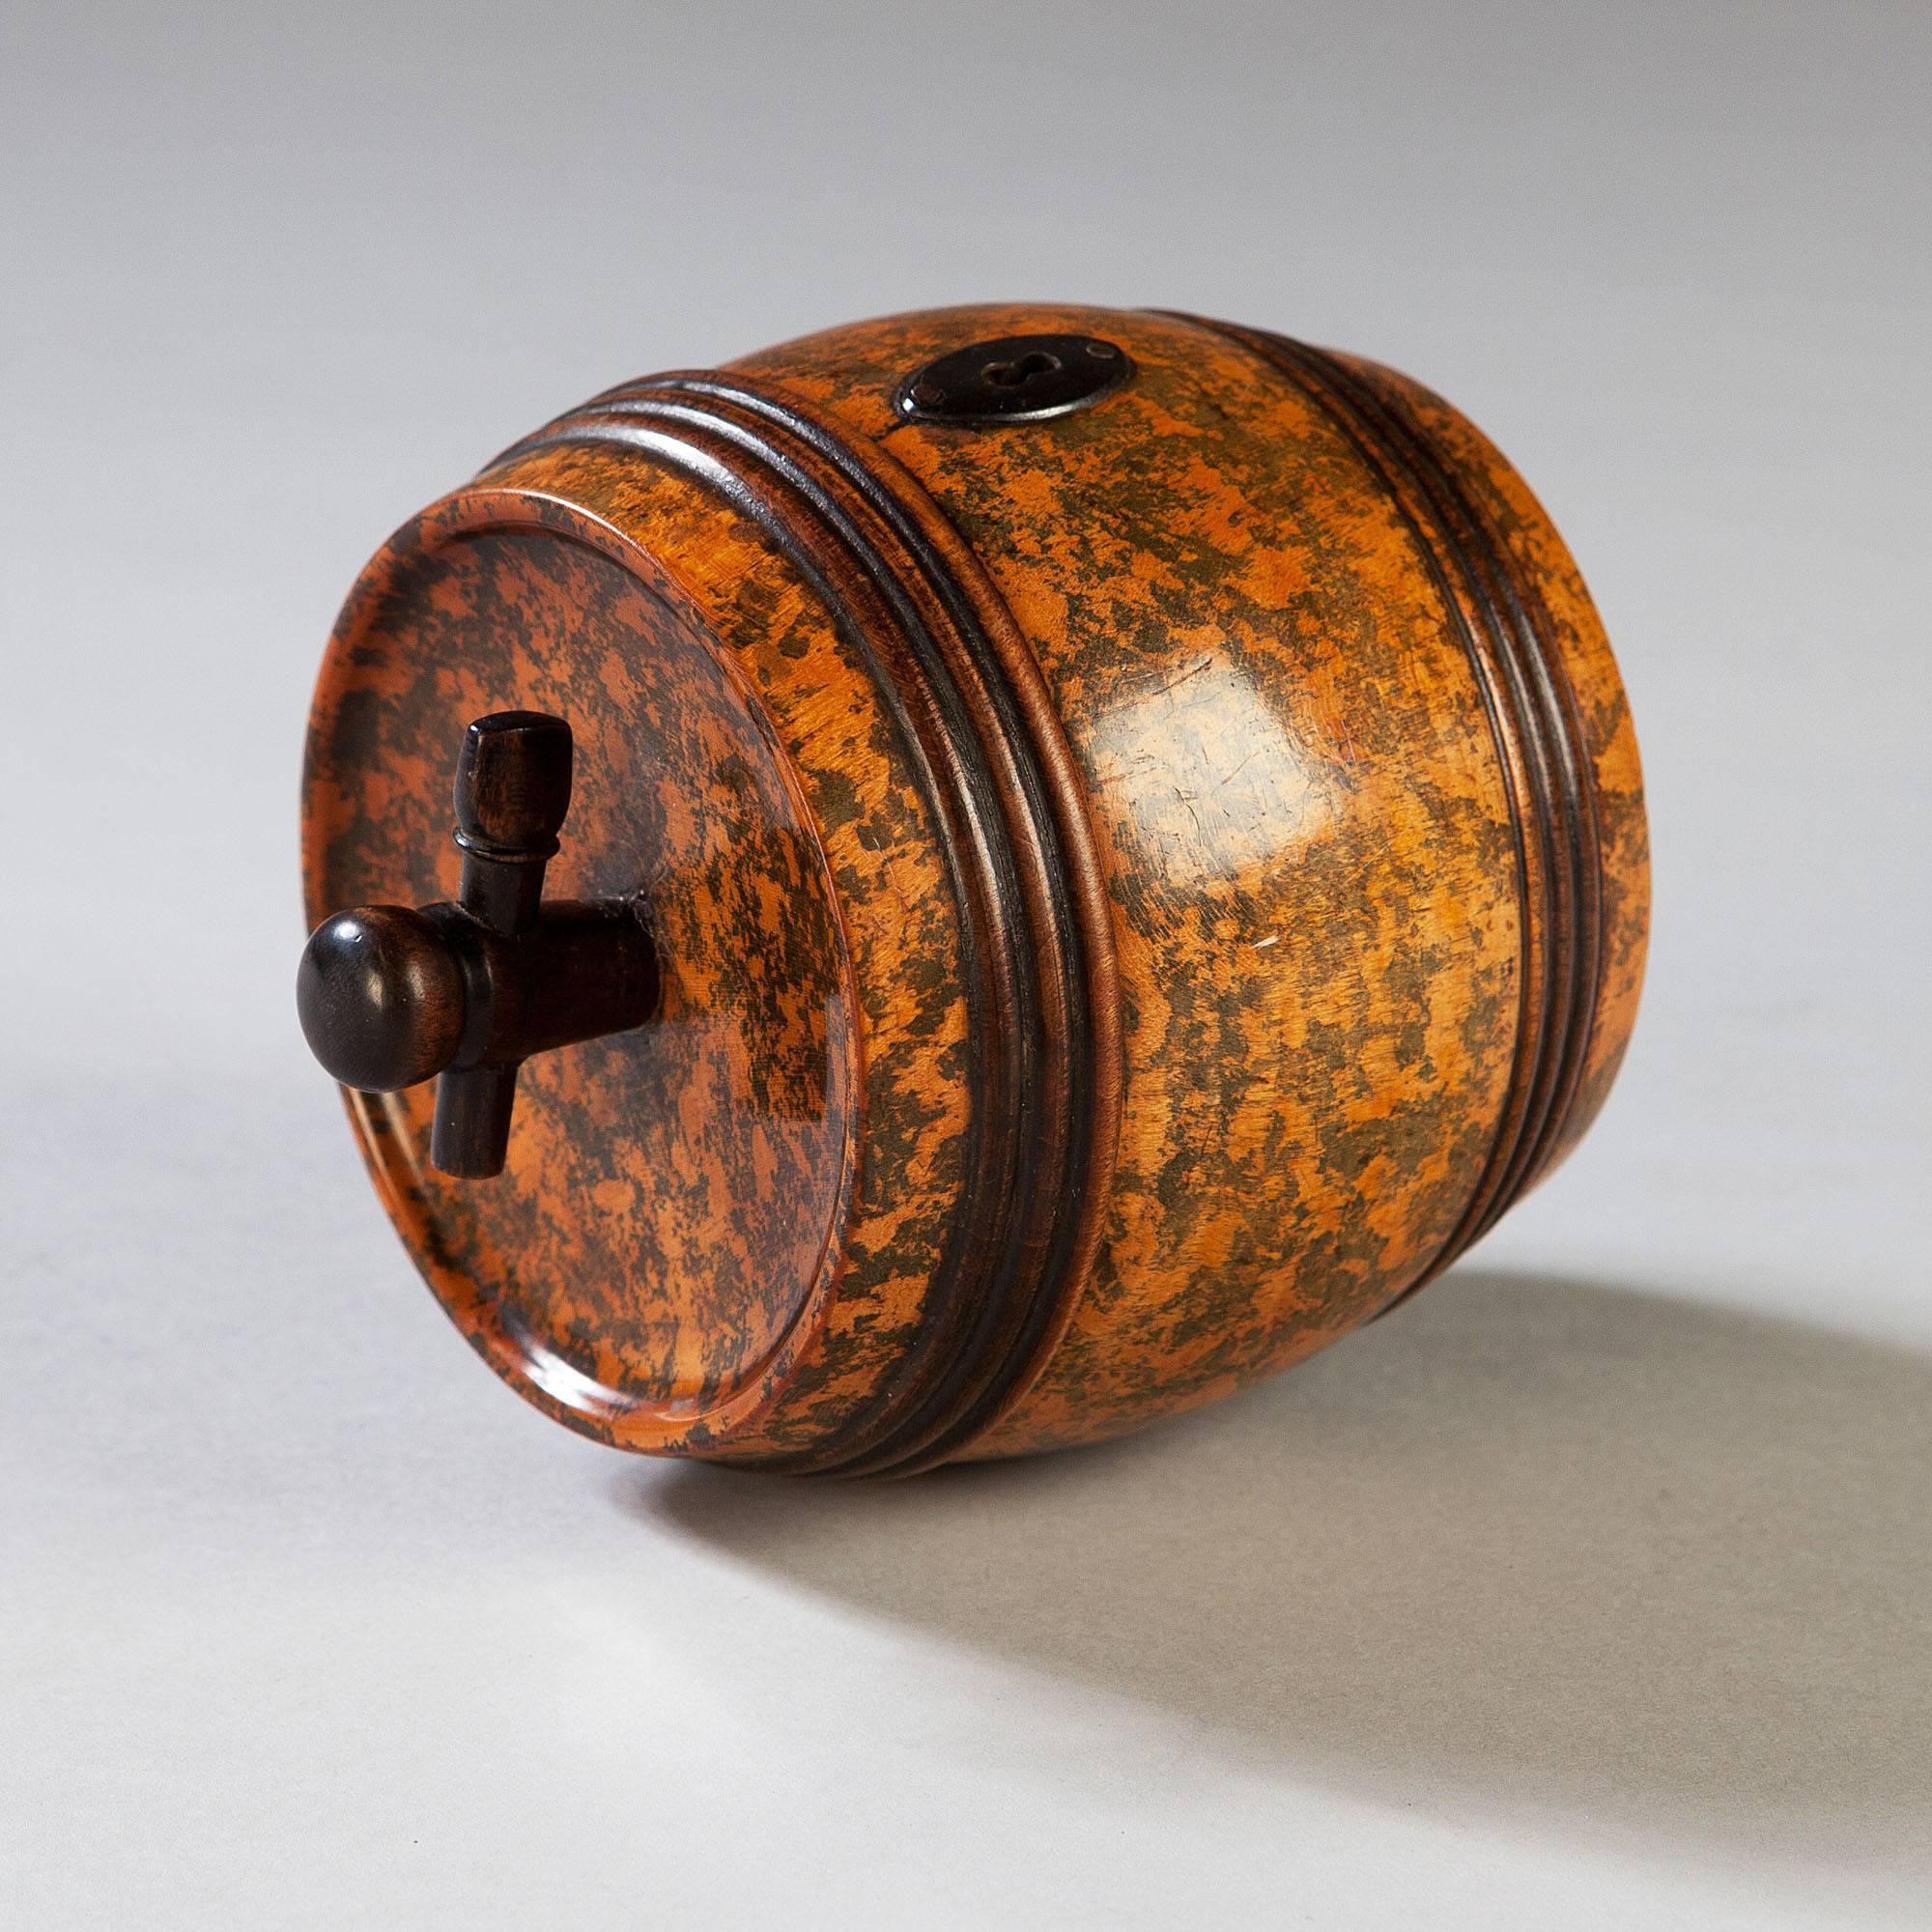 England, Early 19th century.

An exceptional and very rare early 19th-century tea caddy in the form of a barrel. The surface retaining its vivid green staining and fine patina, the lid opening to the interior retaining remains of the original foil